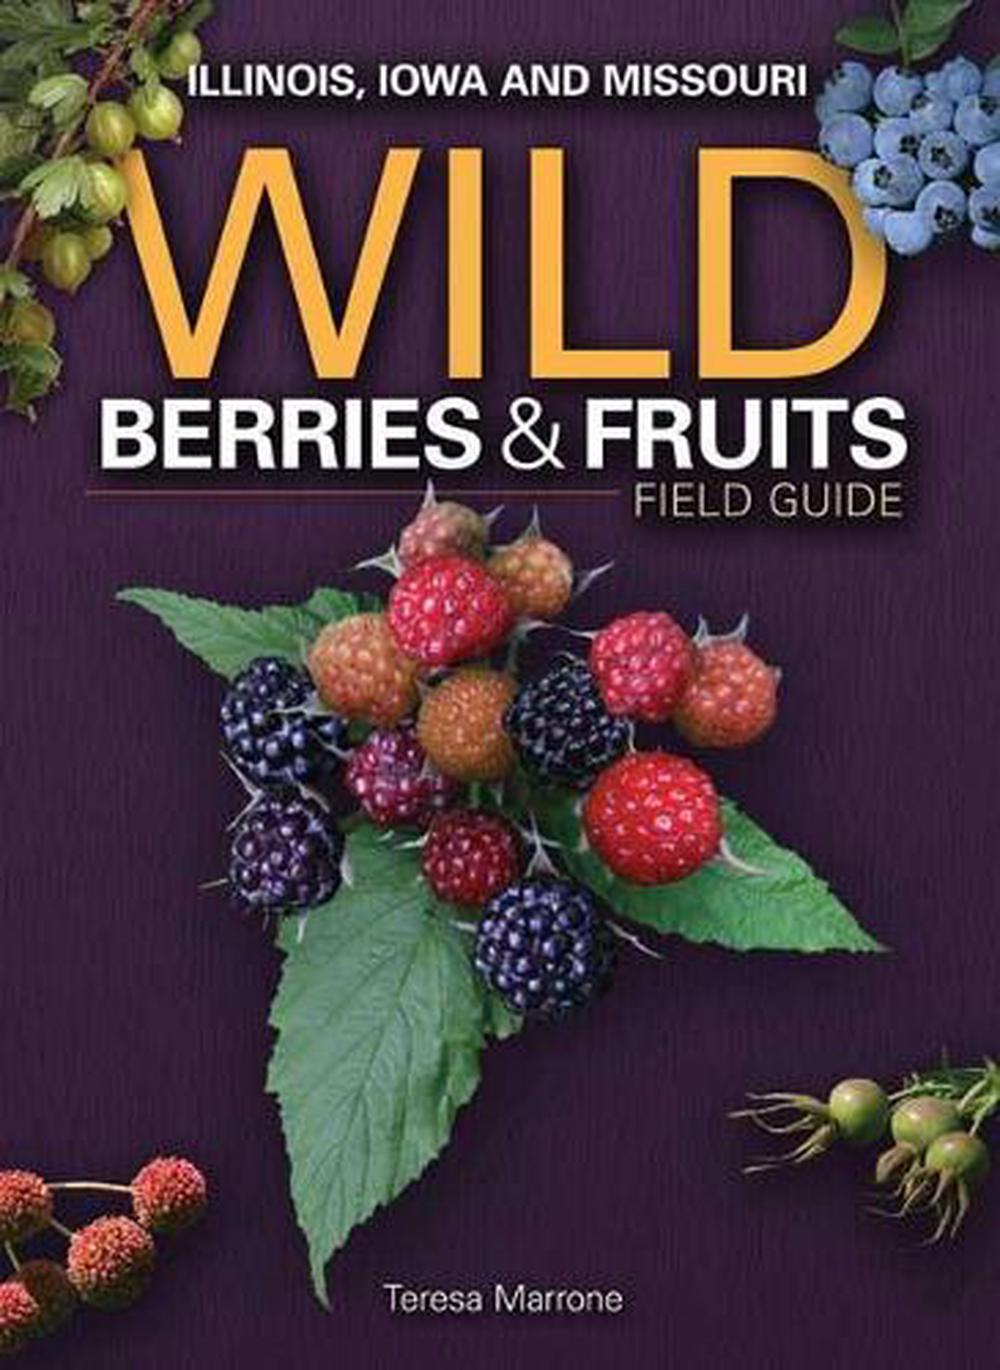 Wild Berries & Fruits Field Guide of Minnesota, Wisconsin and... by Teresa Marrone